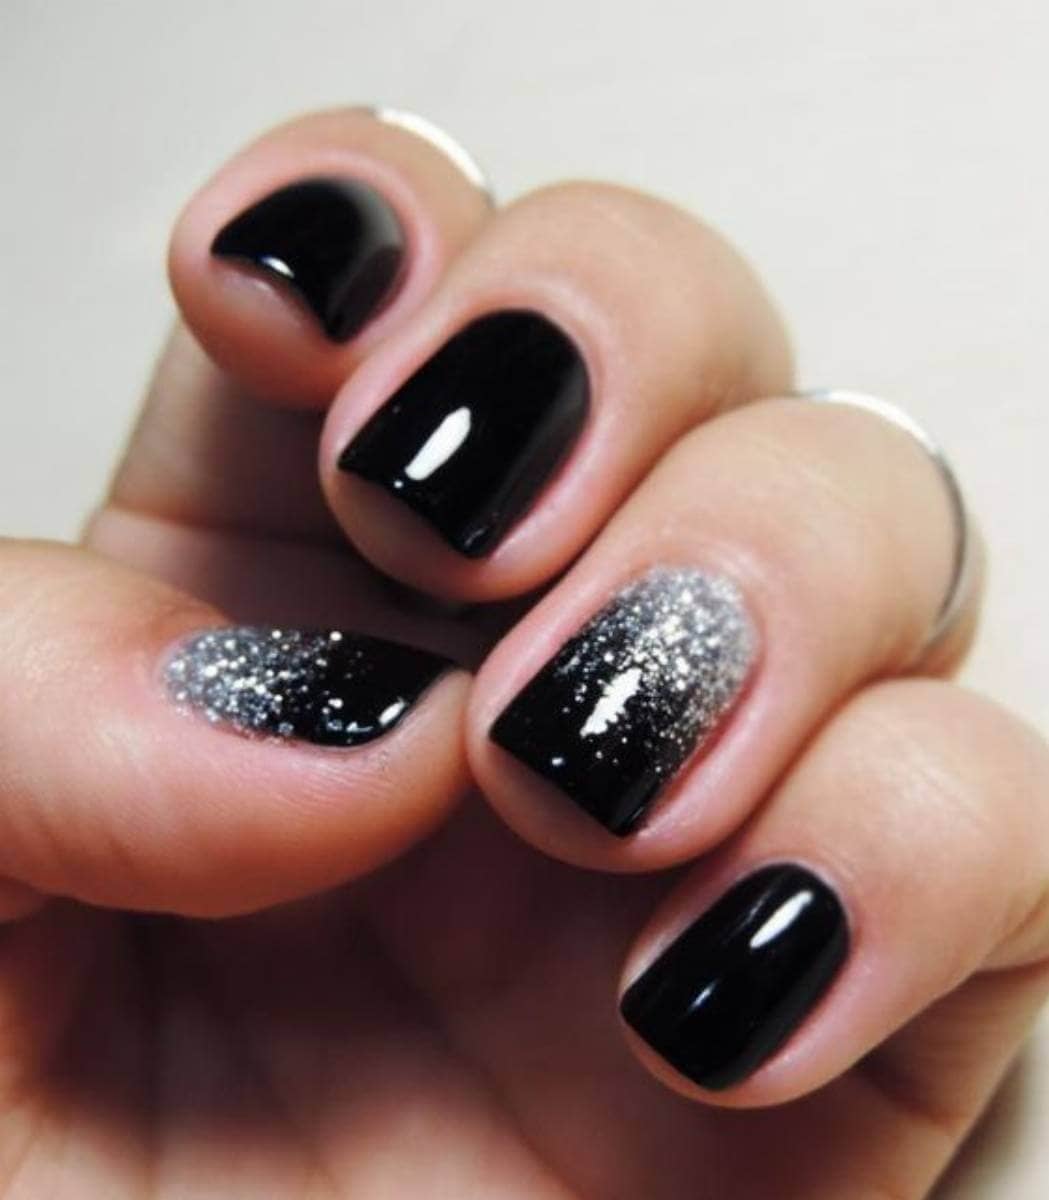 Old Hollywood glamor- silver glitter and black